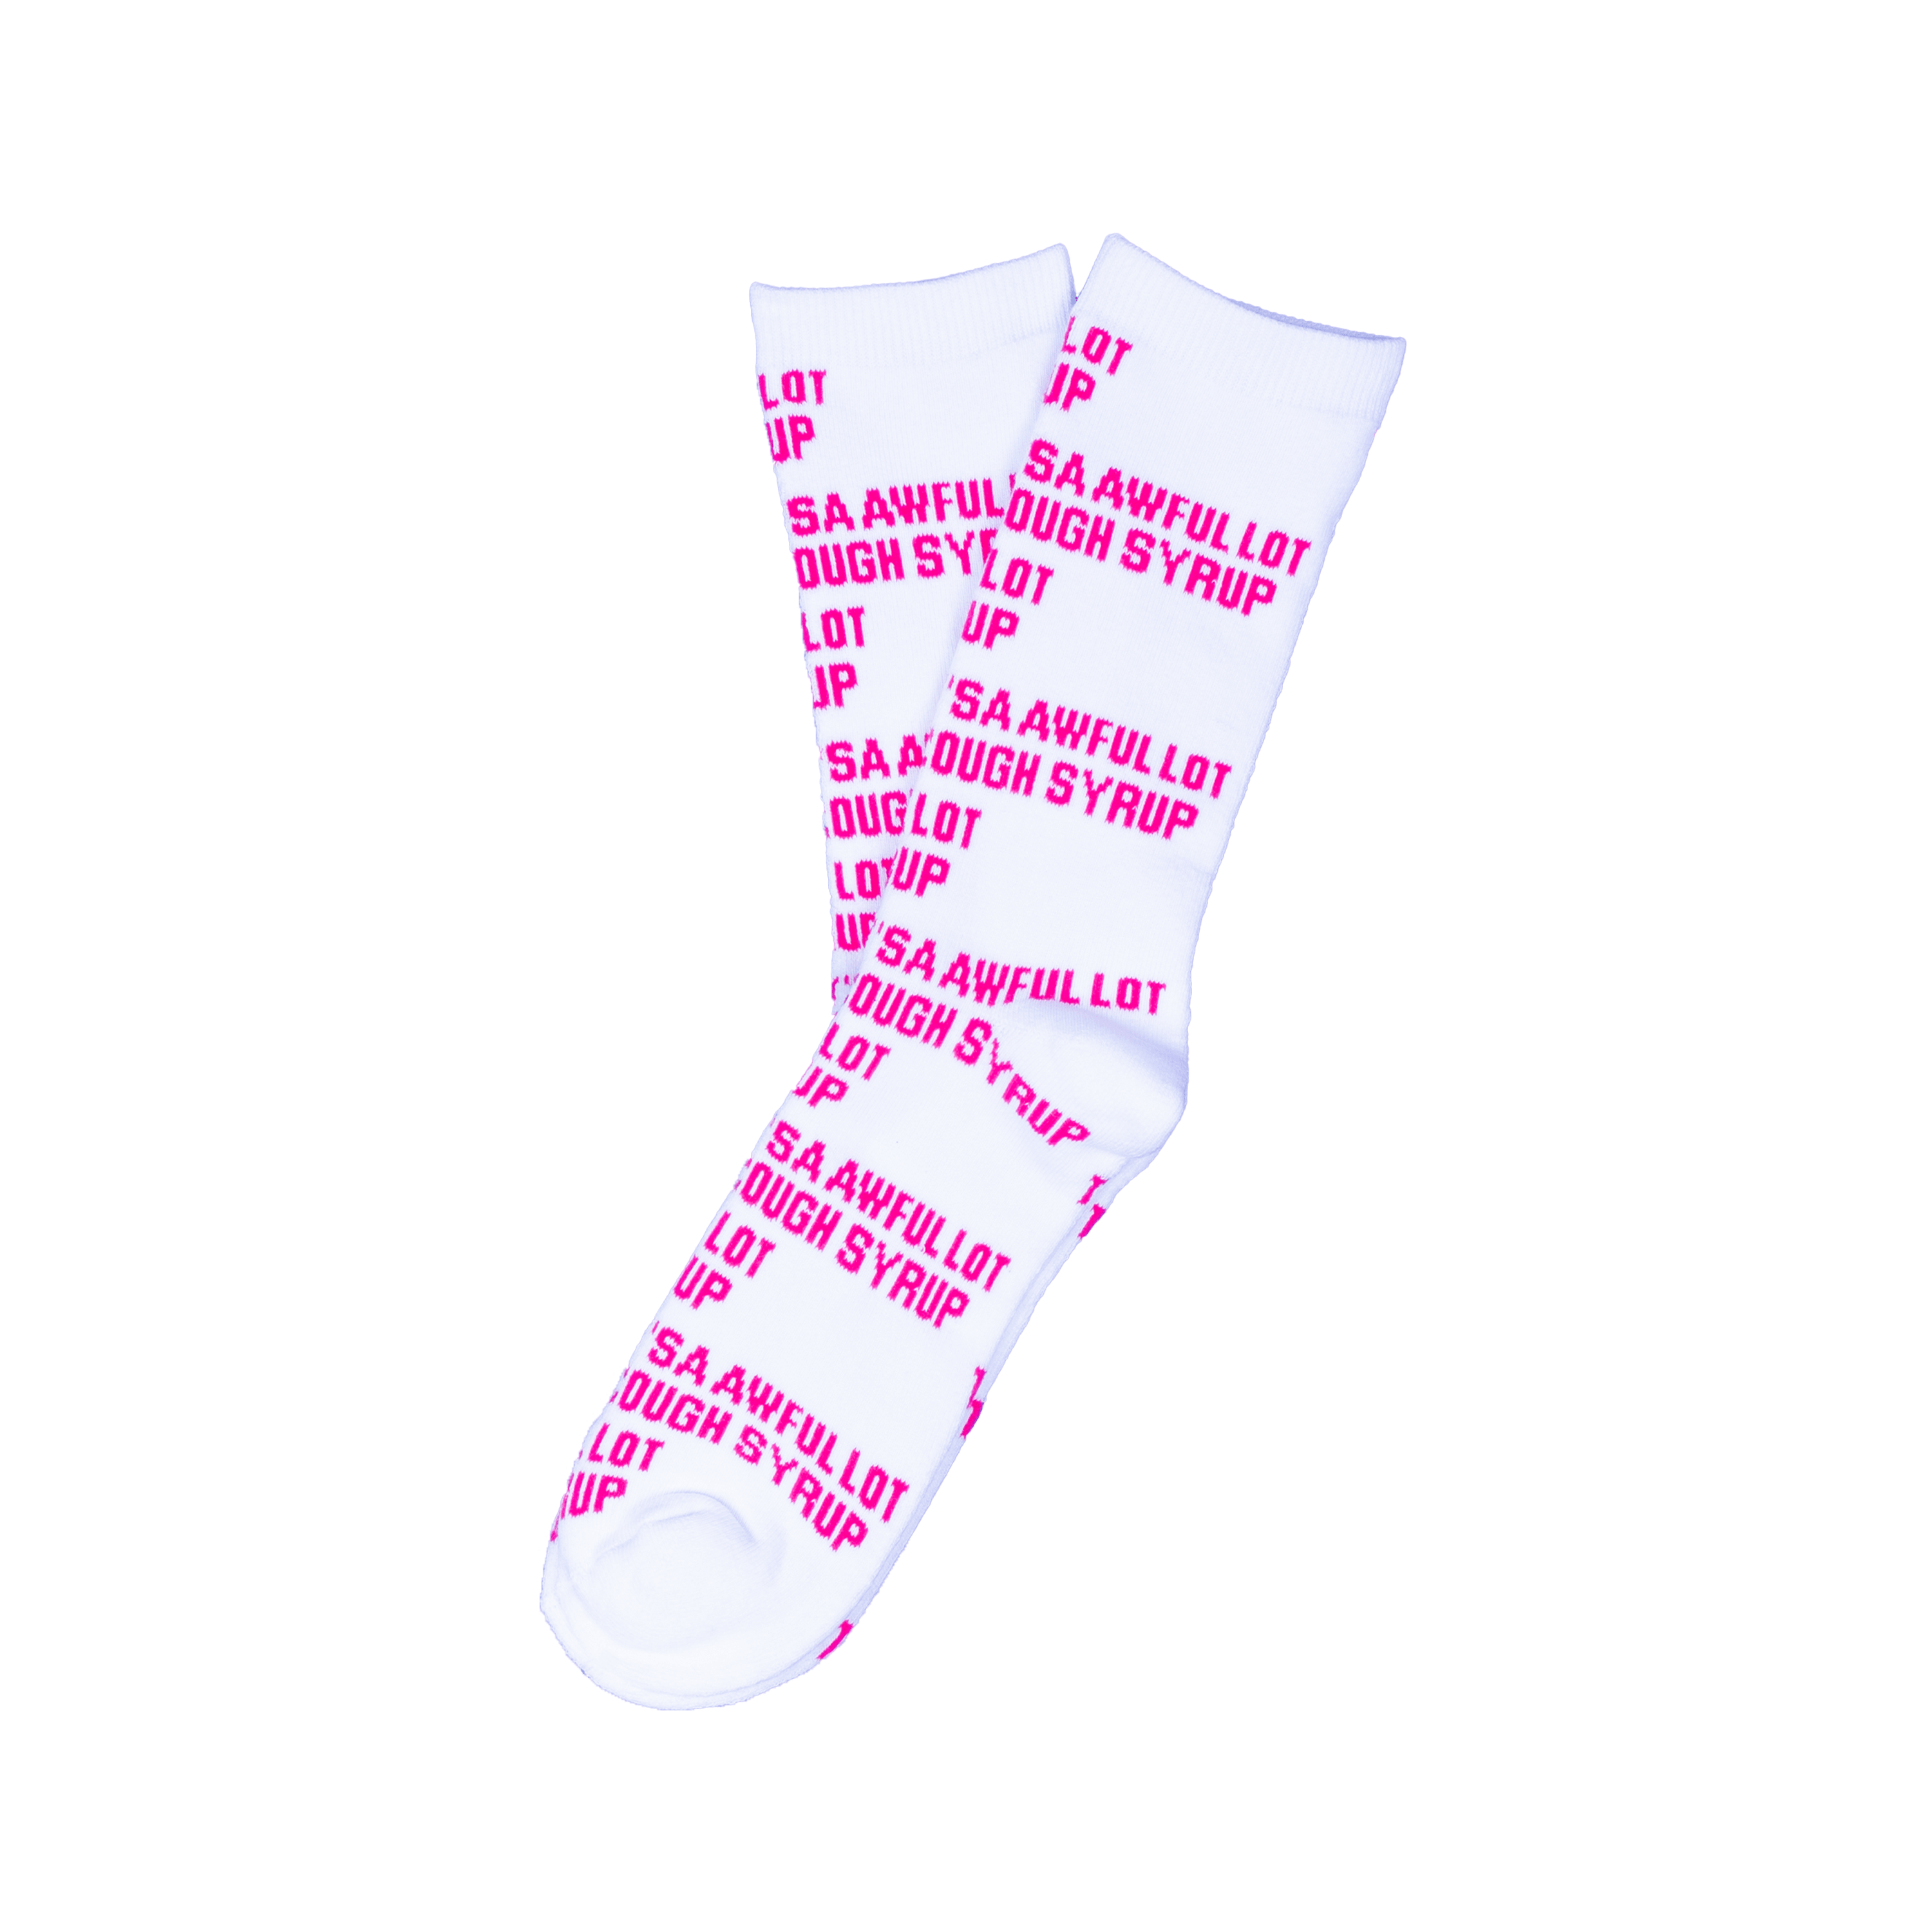 Cough Syrup Socks